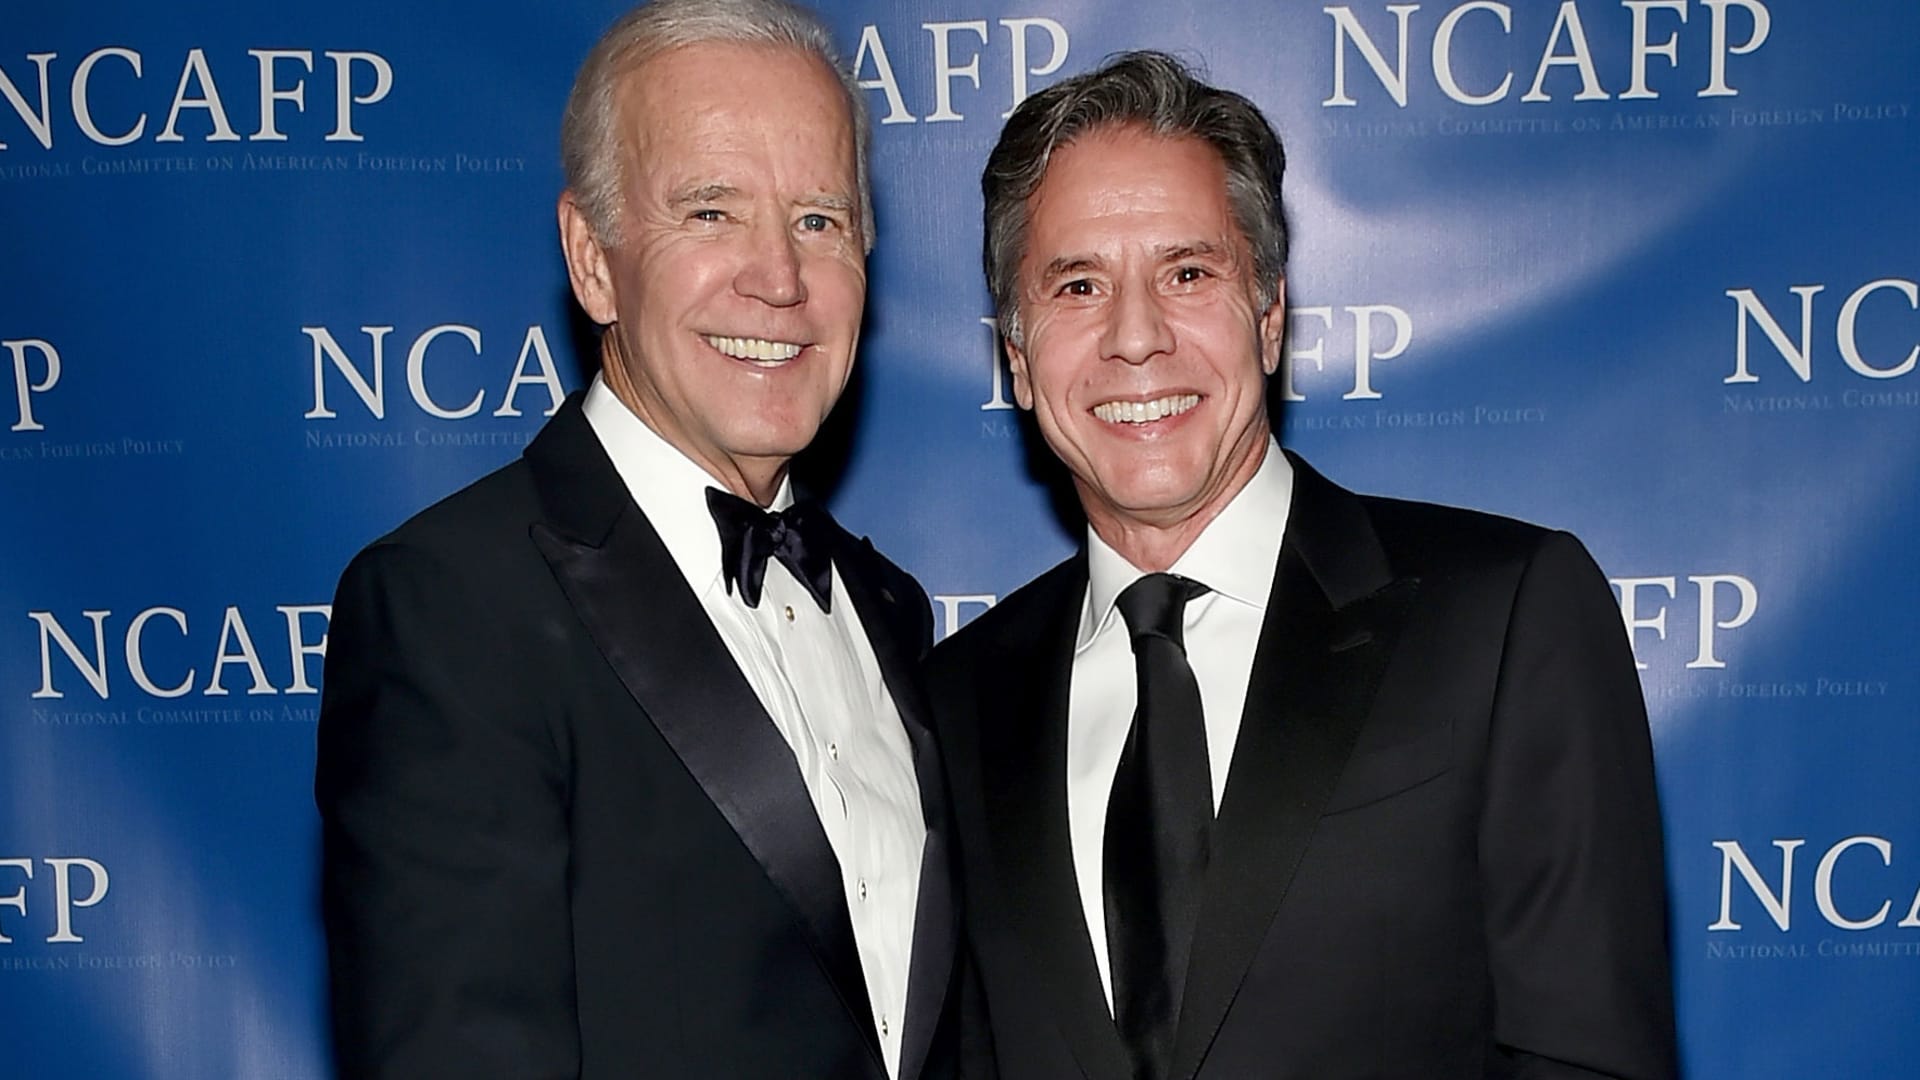 Former Vice President of the United States Joe Biden and Former Deputy Secretary of State Antony Blinken attend the National Committee On American Foreign Policy 2017 Gala Awards Dinner on October 30, 2017 in New York City.